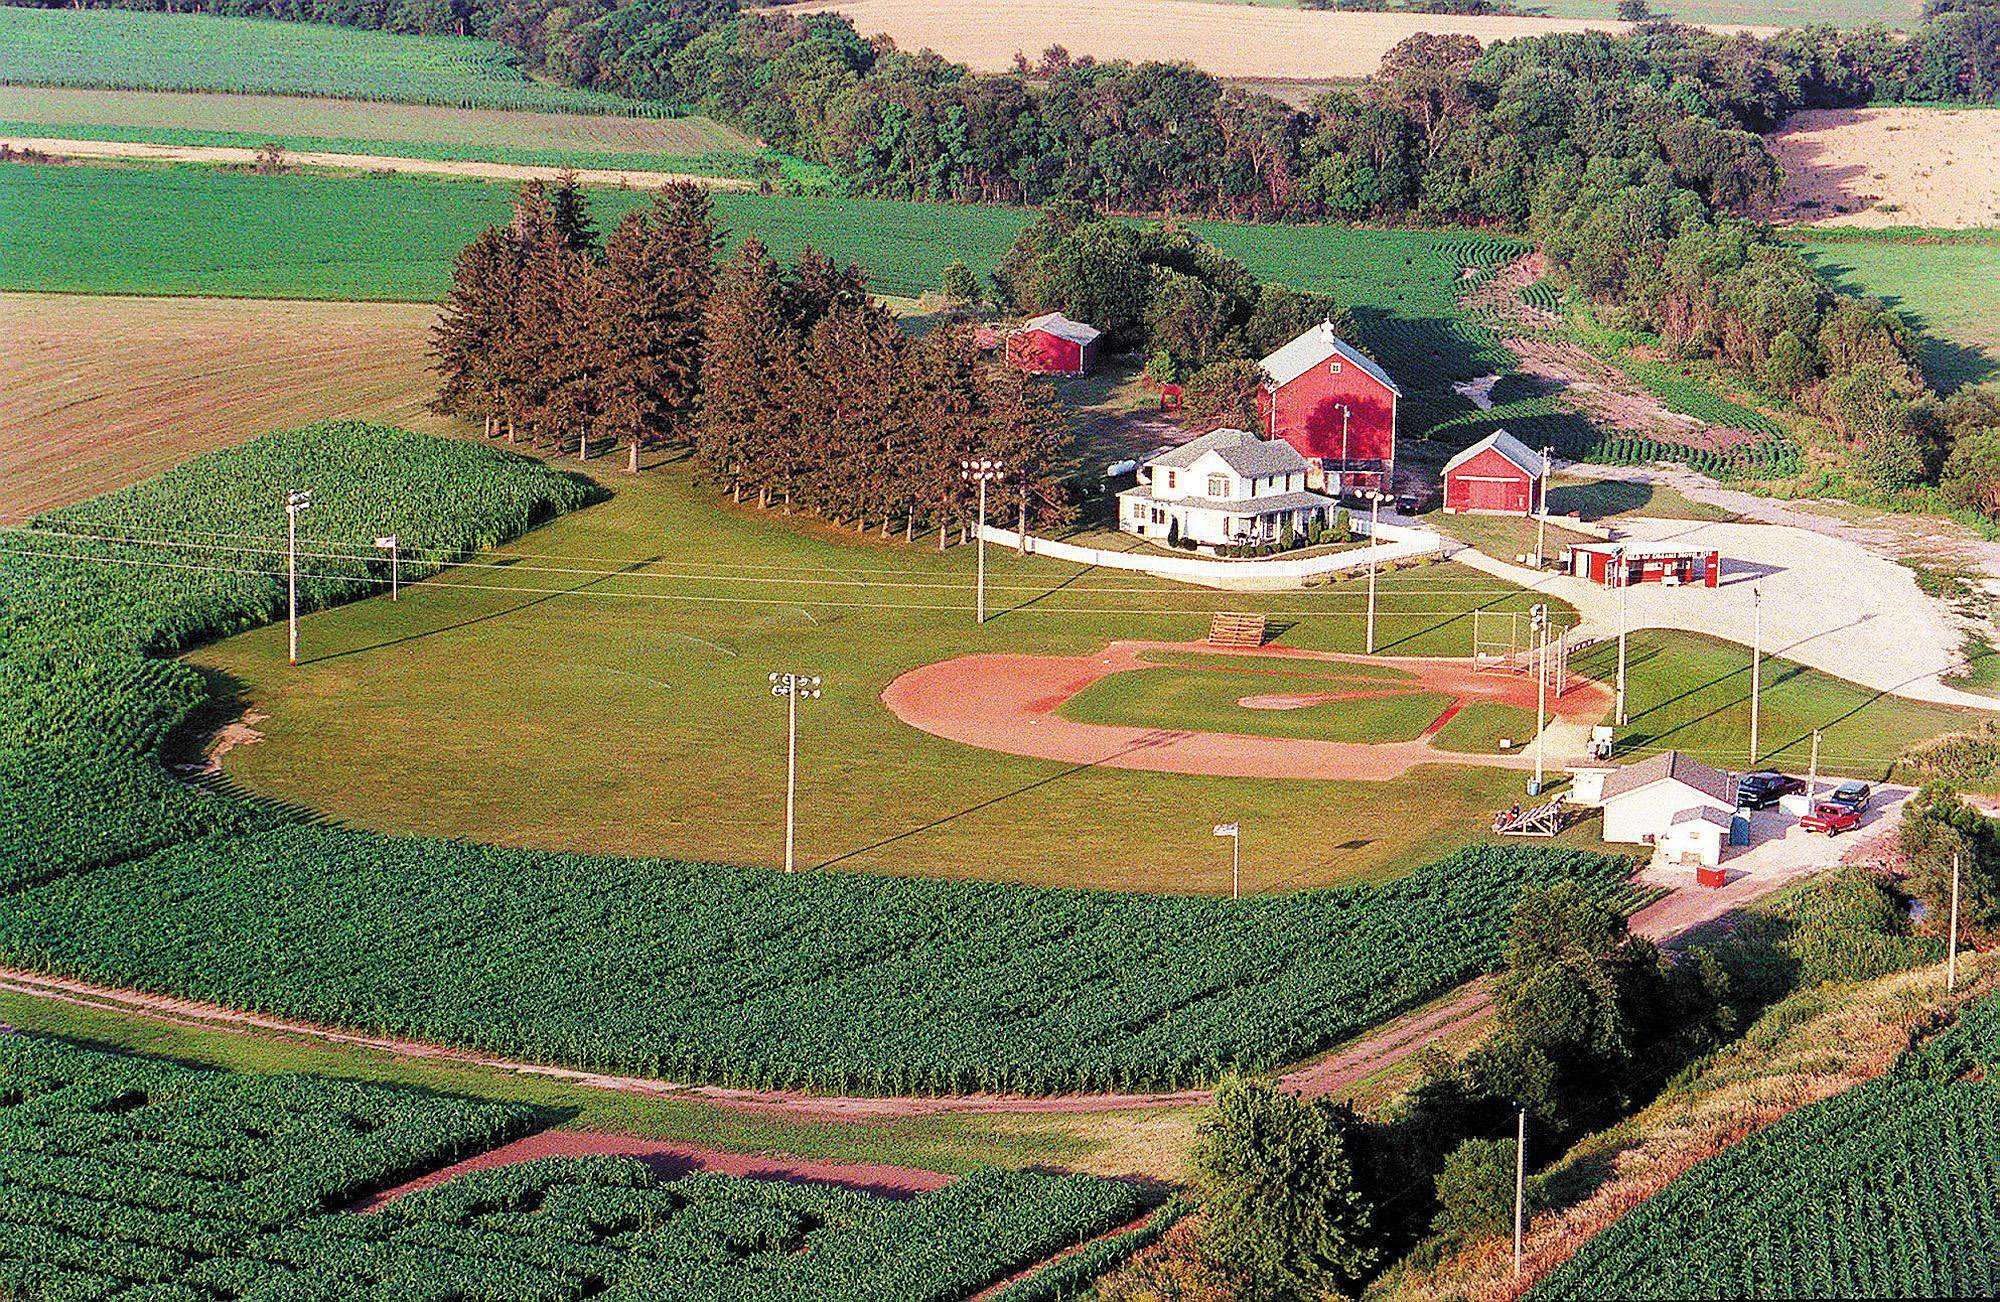 MLB at Field of Dreams: Aaron Judge asks, 'Is this heaven?